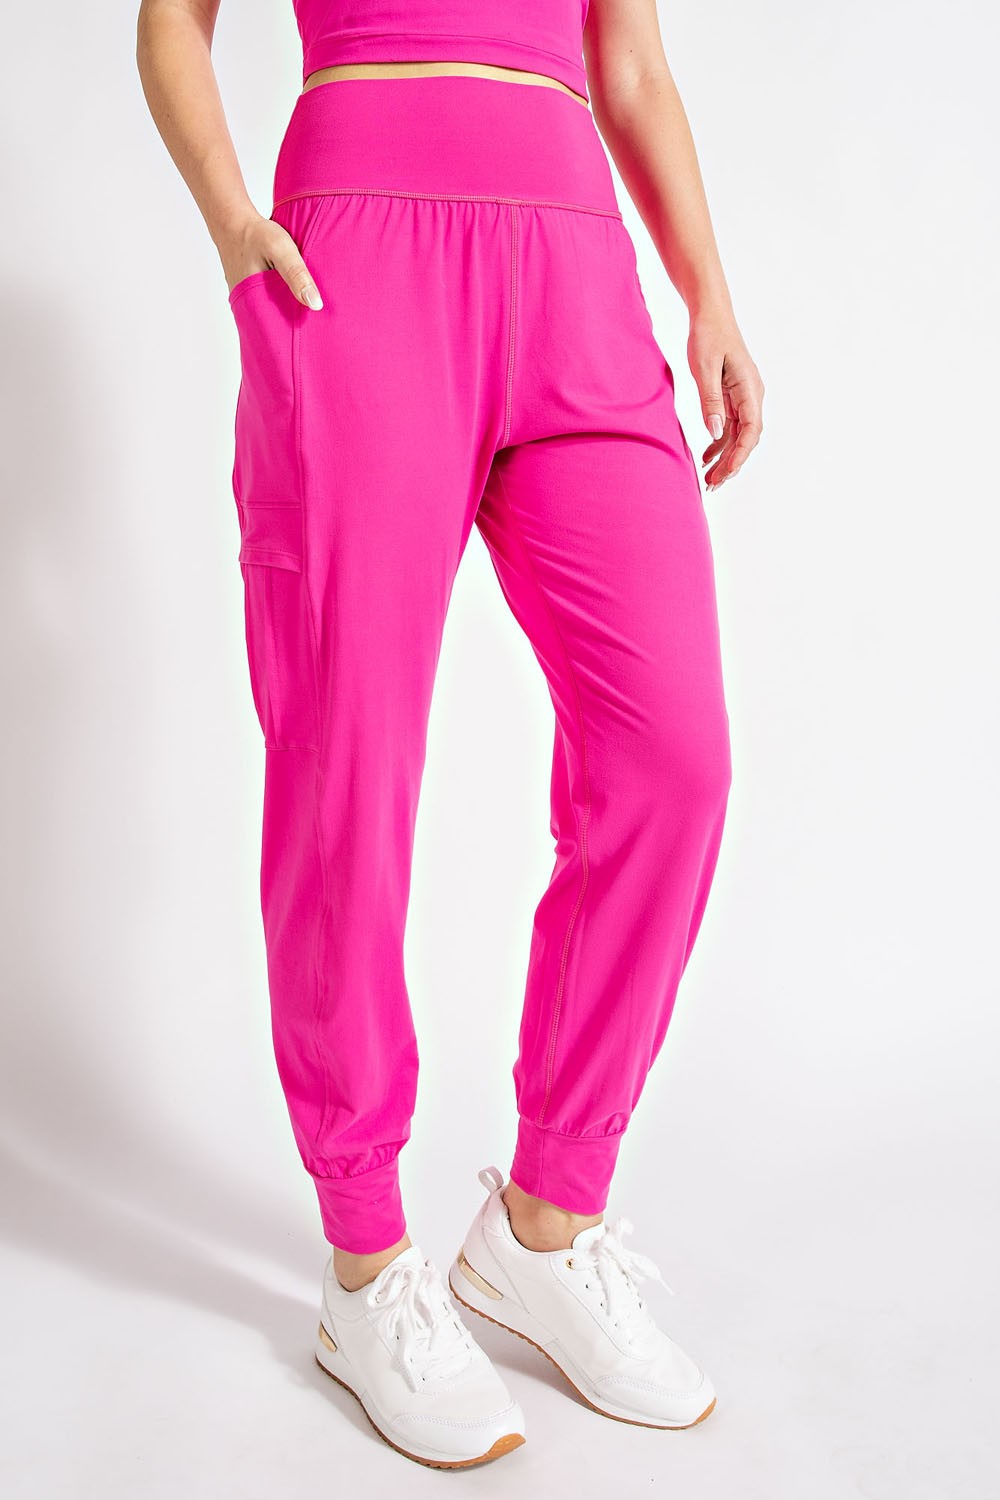 Sonic Pink Plus Size Butter Jogger With Side Pockets